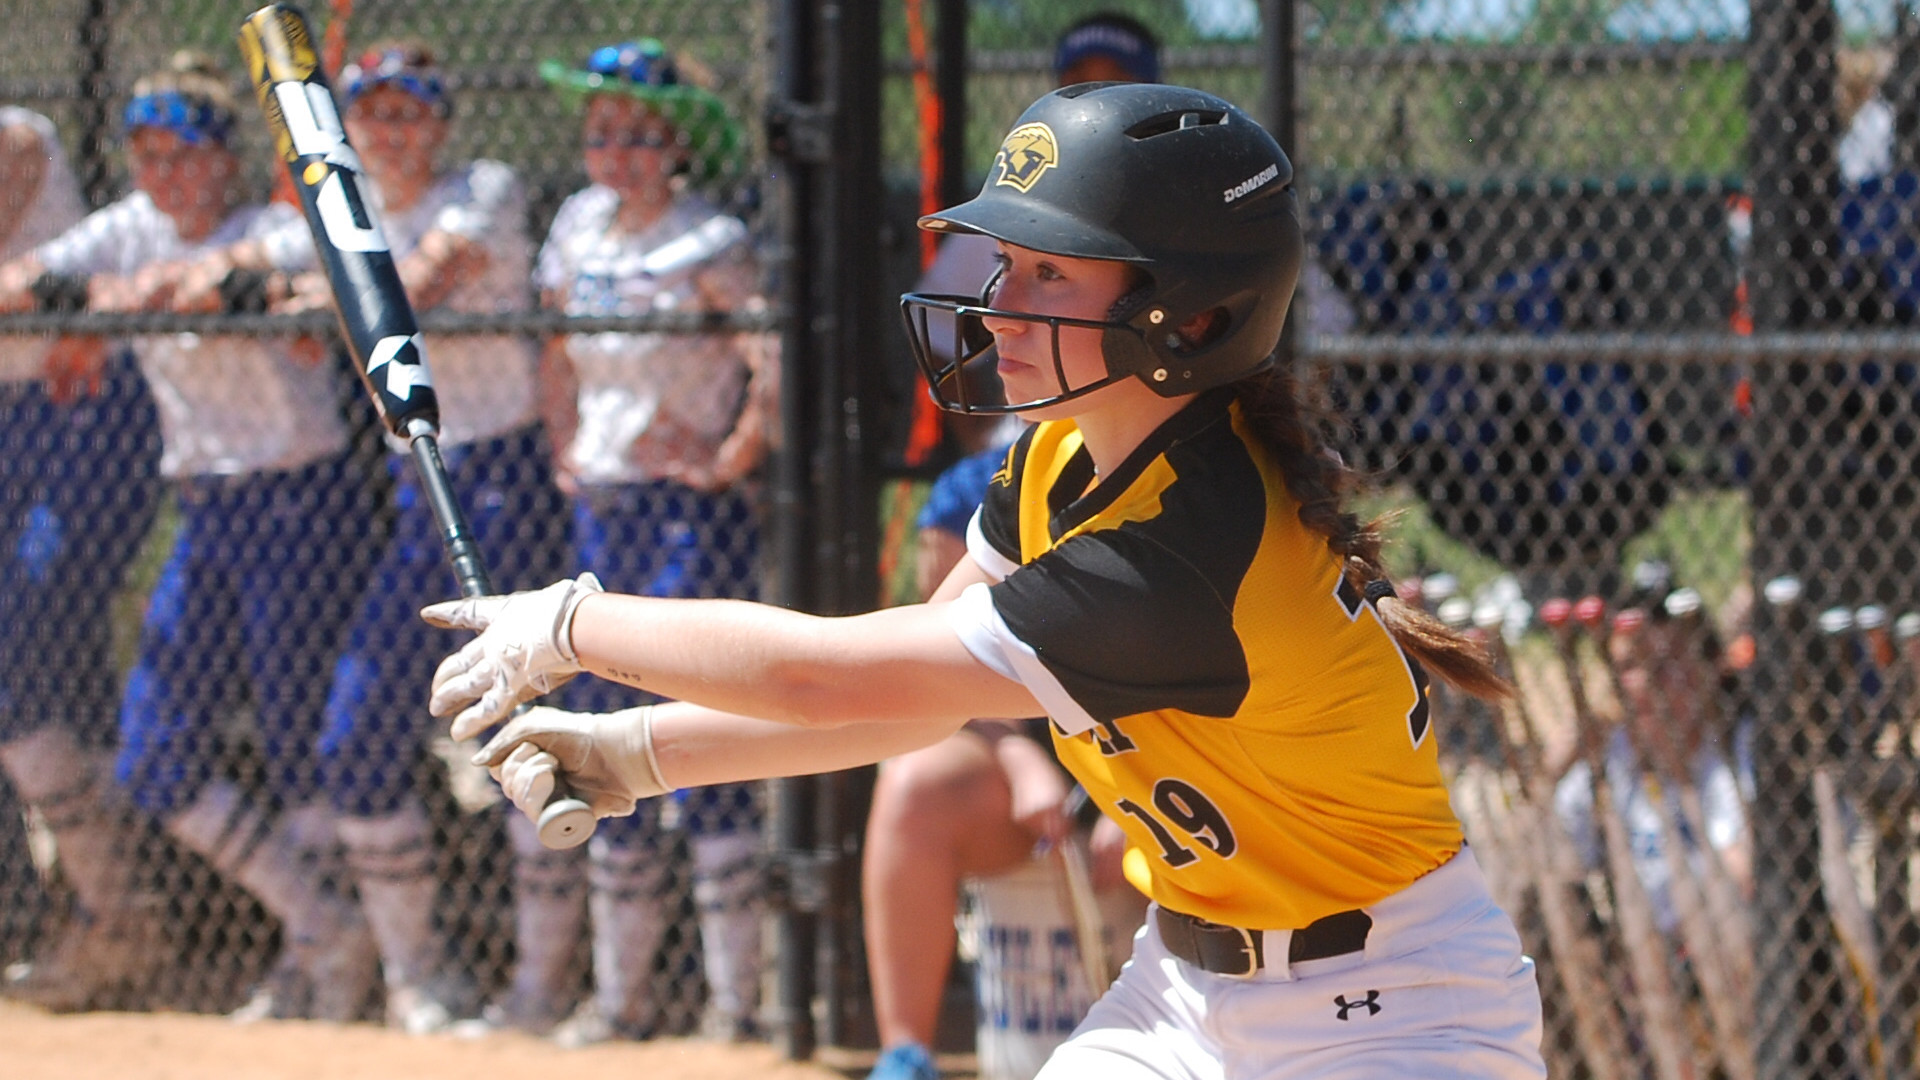 Sydney Rau had a triple among her two hits against the Bantams and Mules.